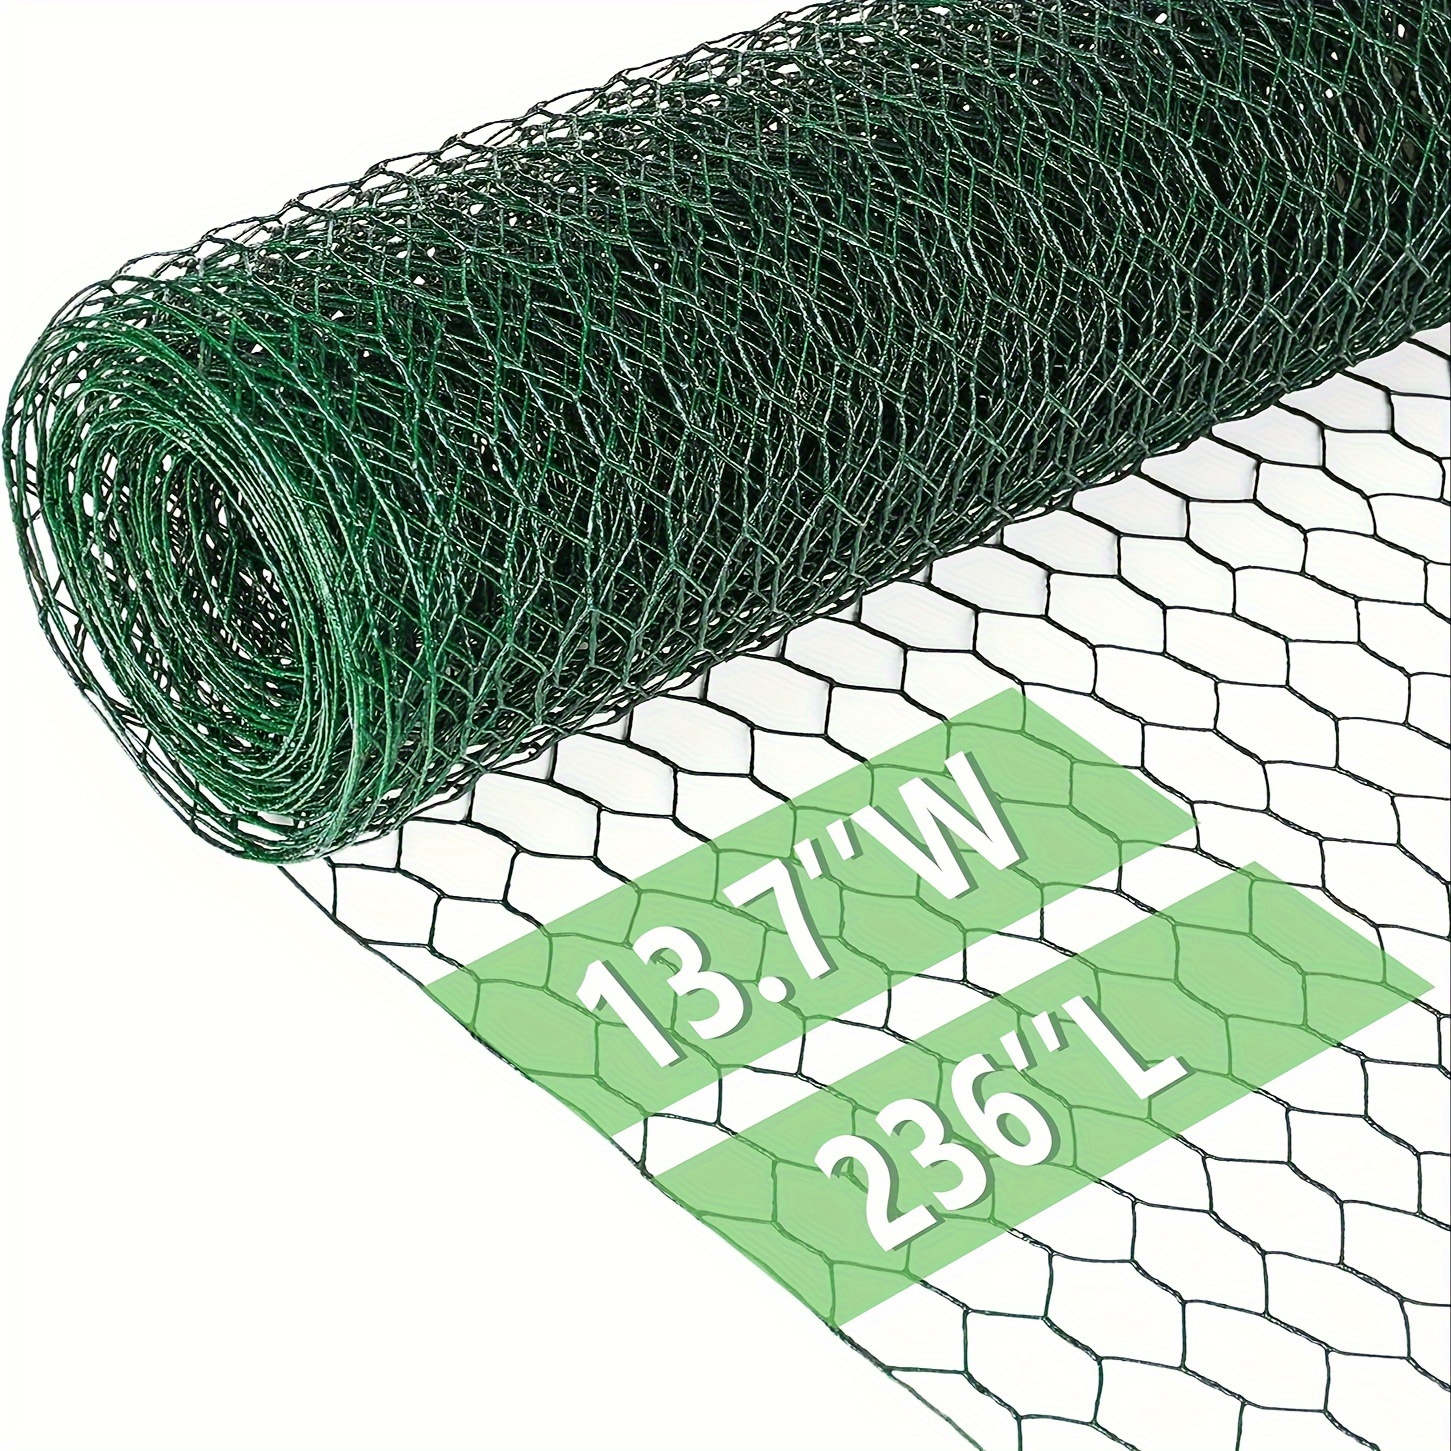 

1 Pack, Chicken Wire Poultry Wire Netting Hexagonal Galvanized Mesh Garden Fence Barrier For Pet Rabbit Chicken Fencing (pvc-coated)